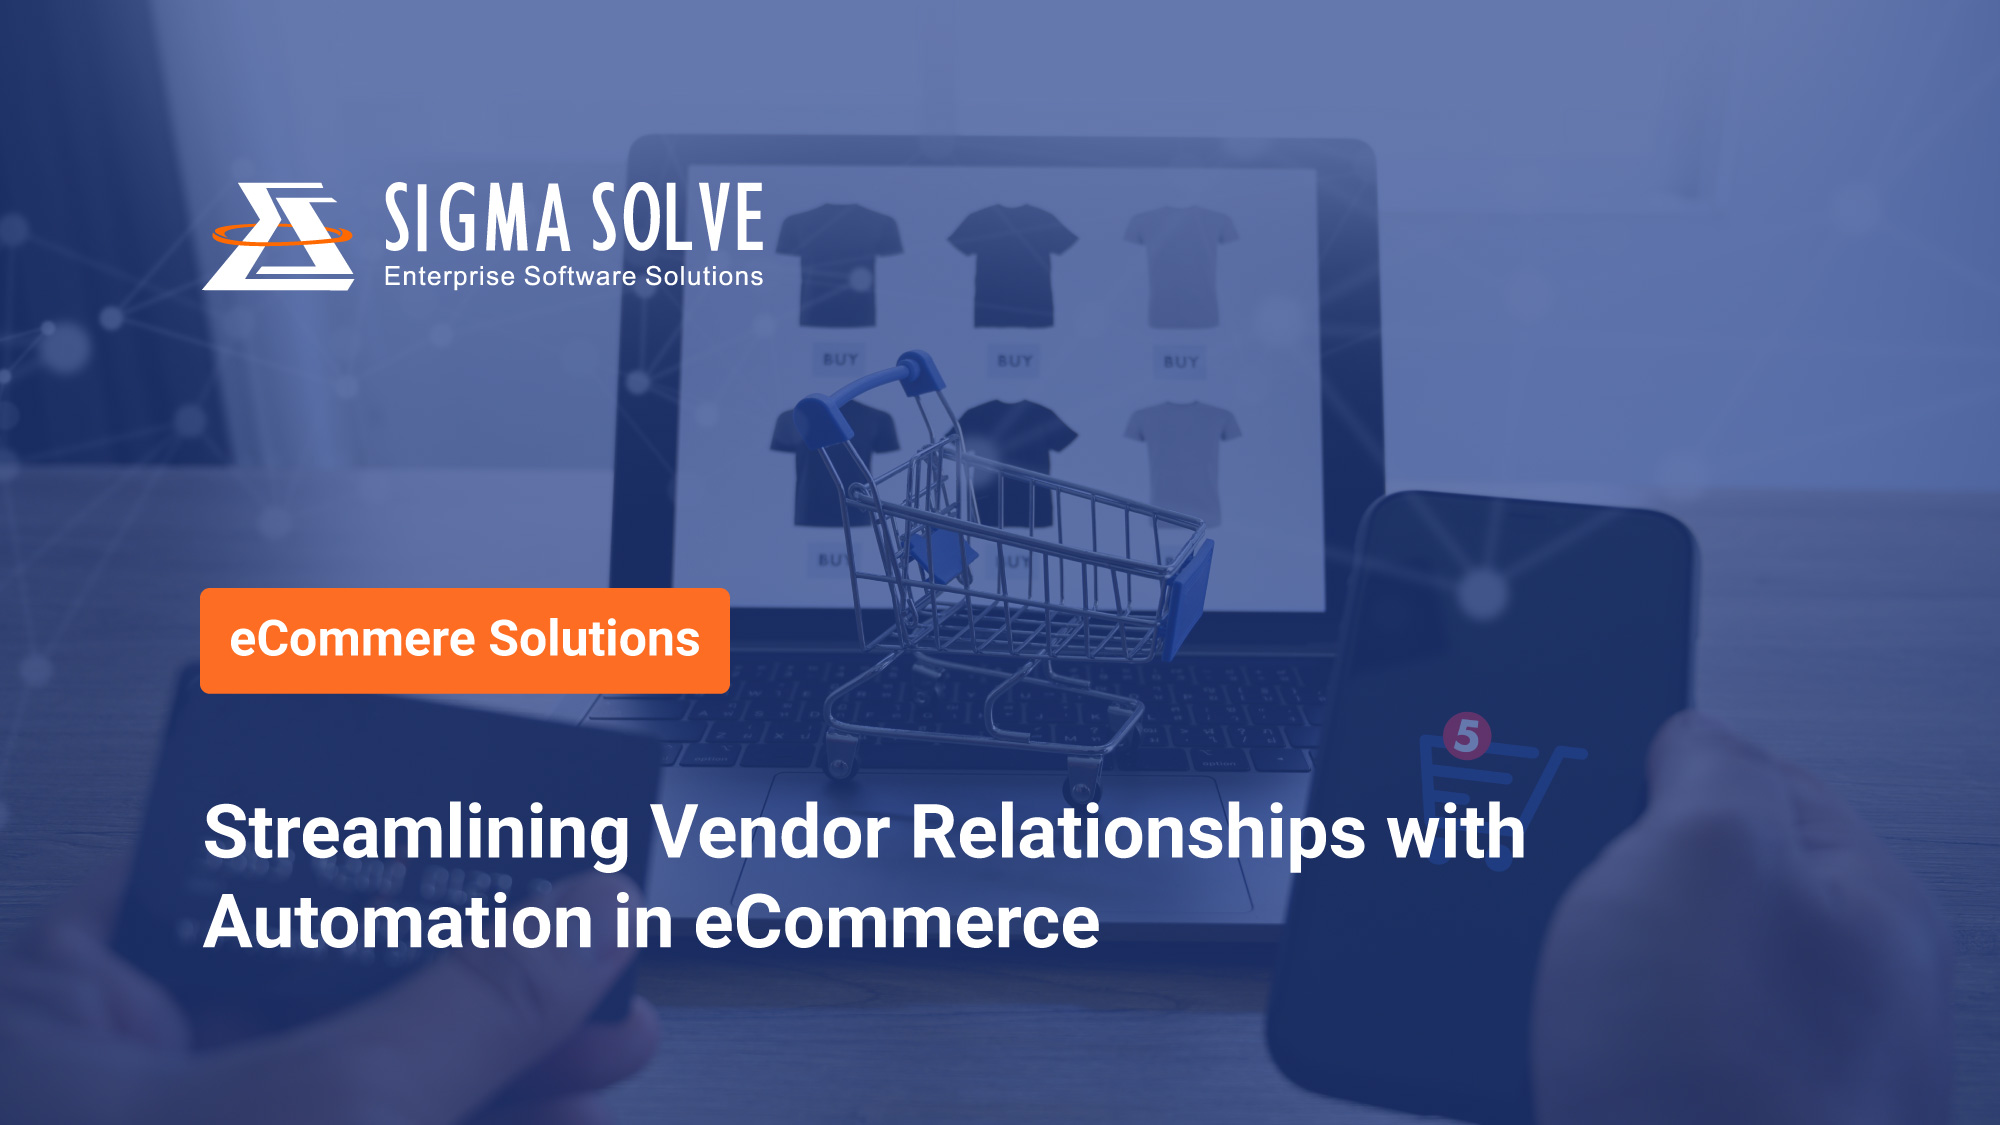 Streamlining Vendor Relationships with Automation in eCommerce - Sigma Solve Inc